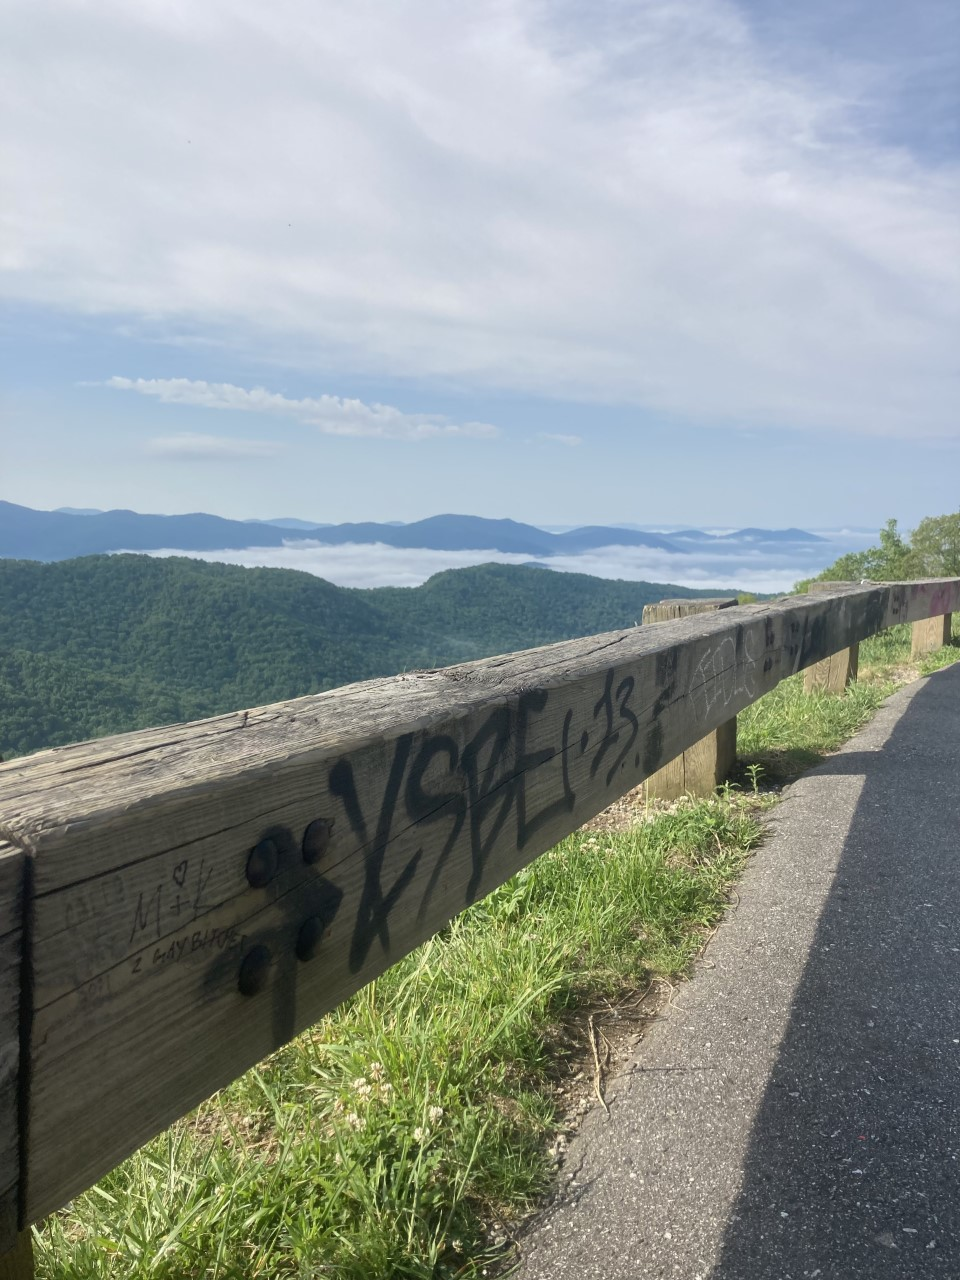 Words and images drawn on a wooden guard rail along the Parkway